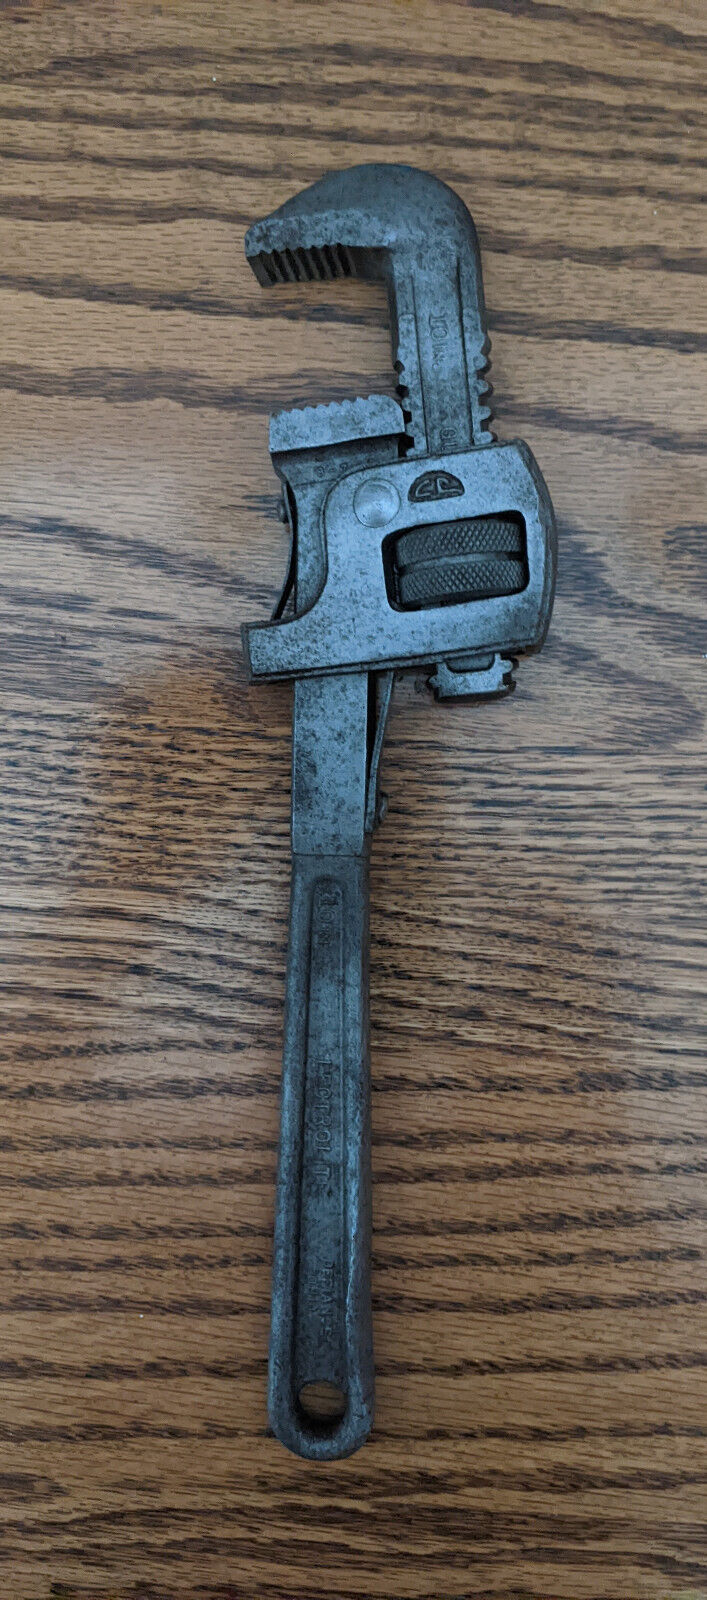 Vintage Lectrolite 10 Inch Pipe Wrench Defiance Ohio USA